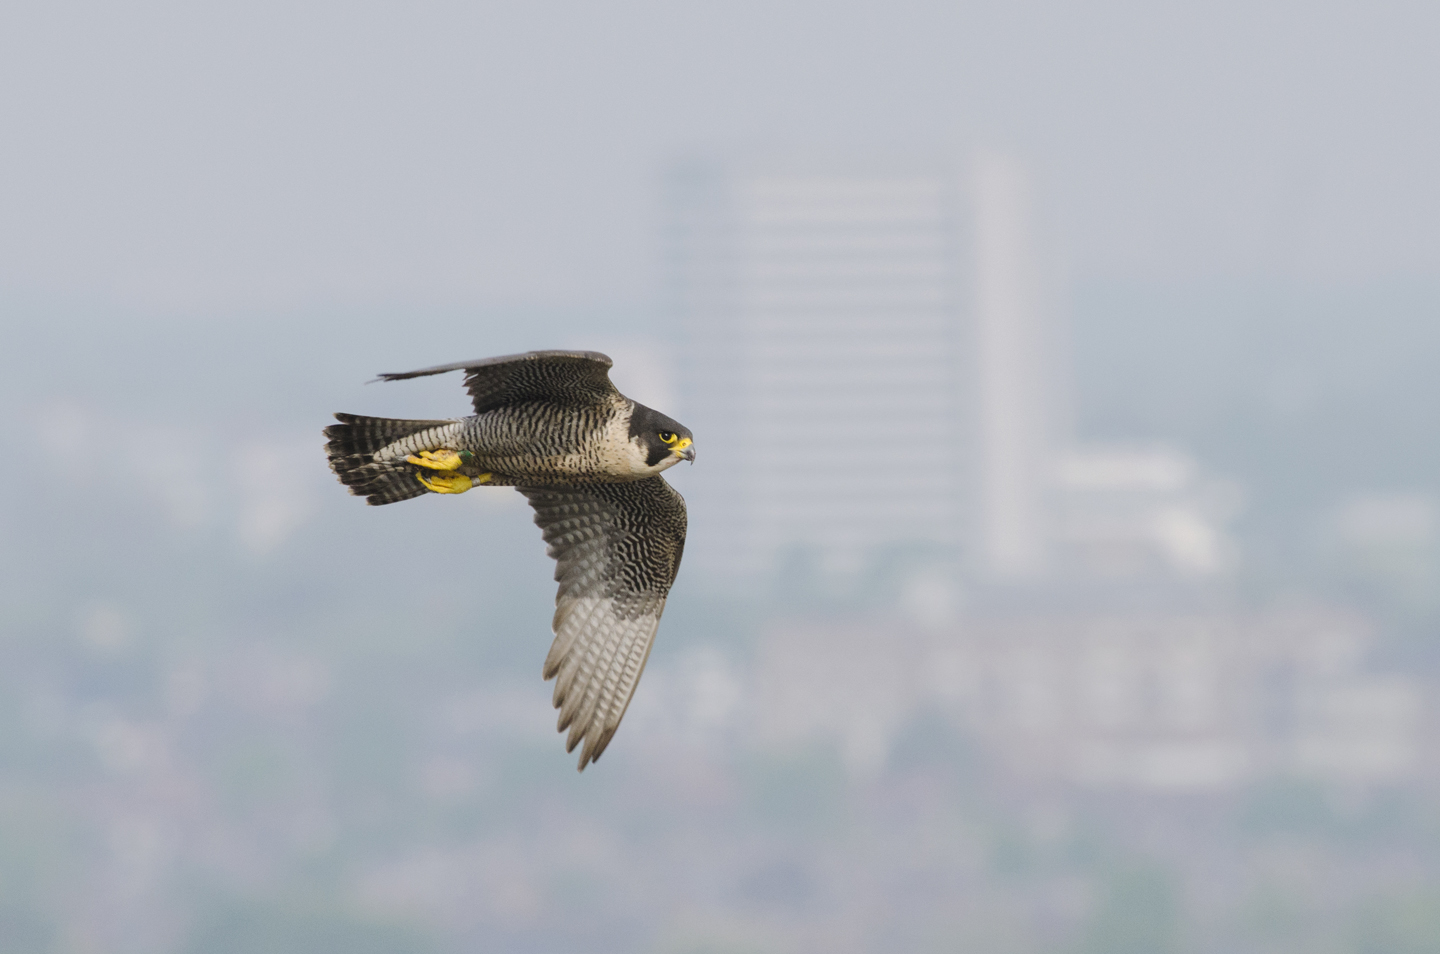  Tall city structures replace crag and cliff and now peregrines are just as comfortable patrolling our urban skies 